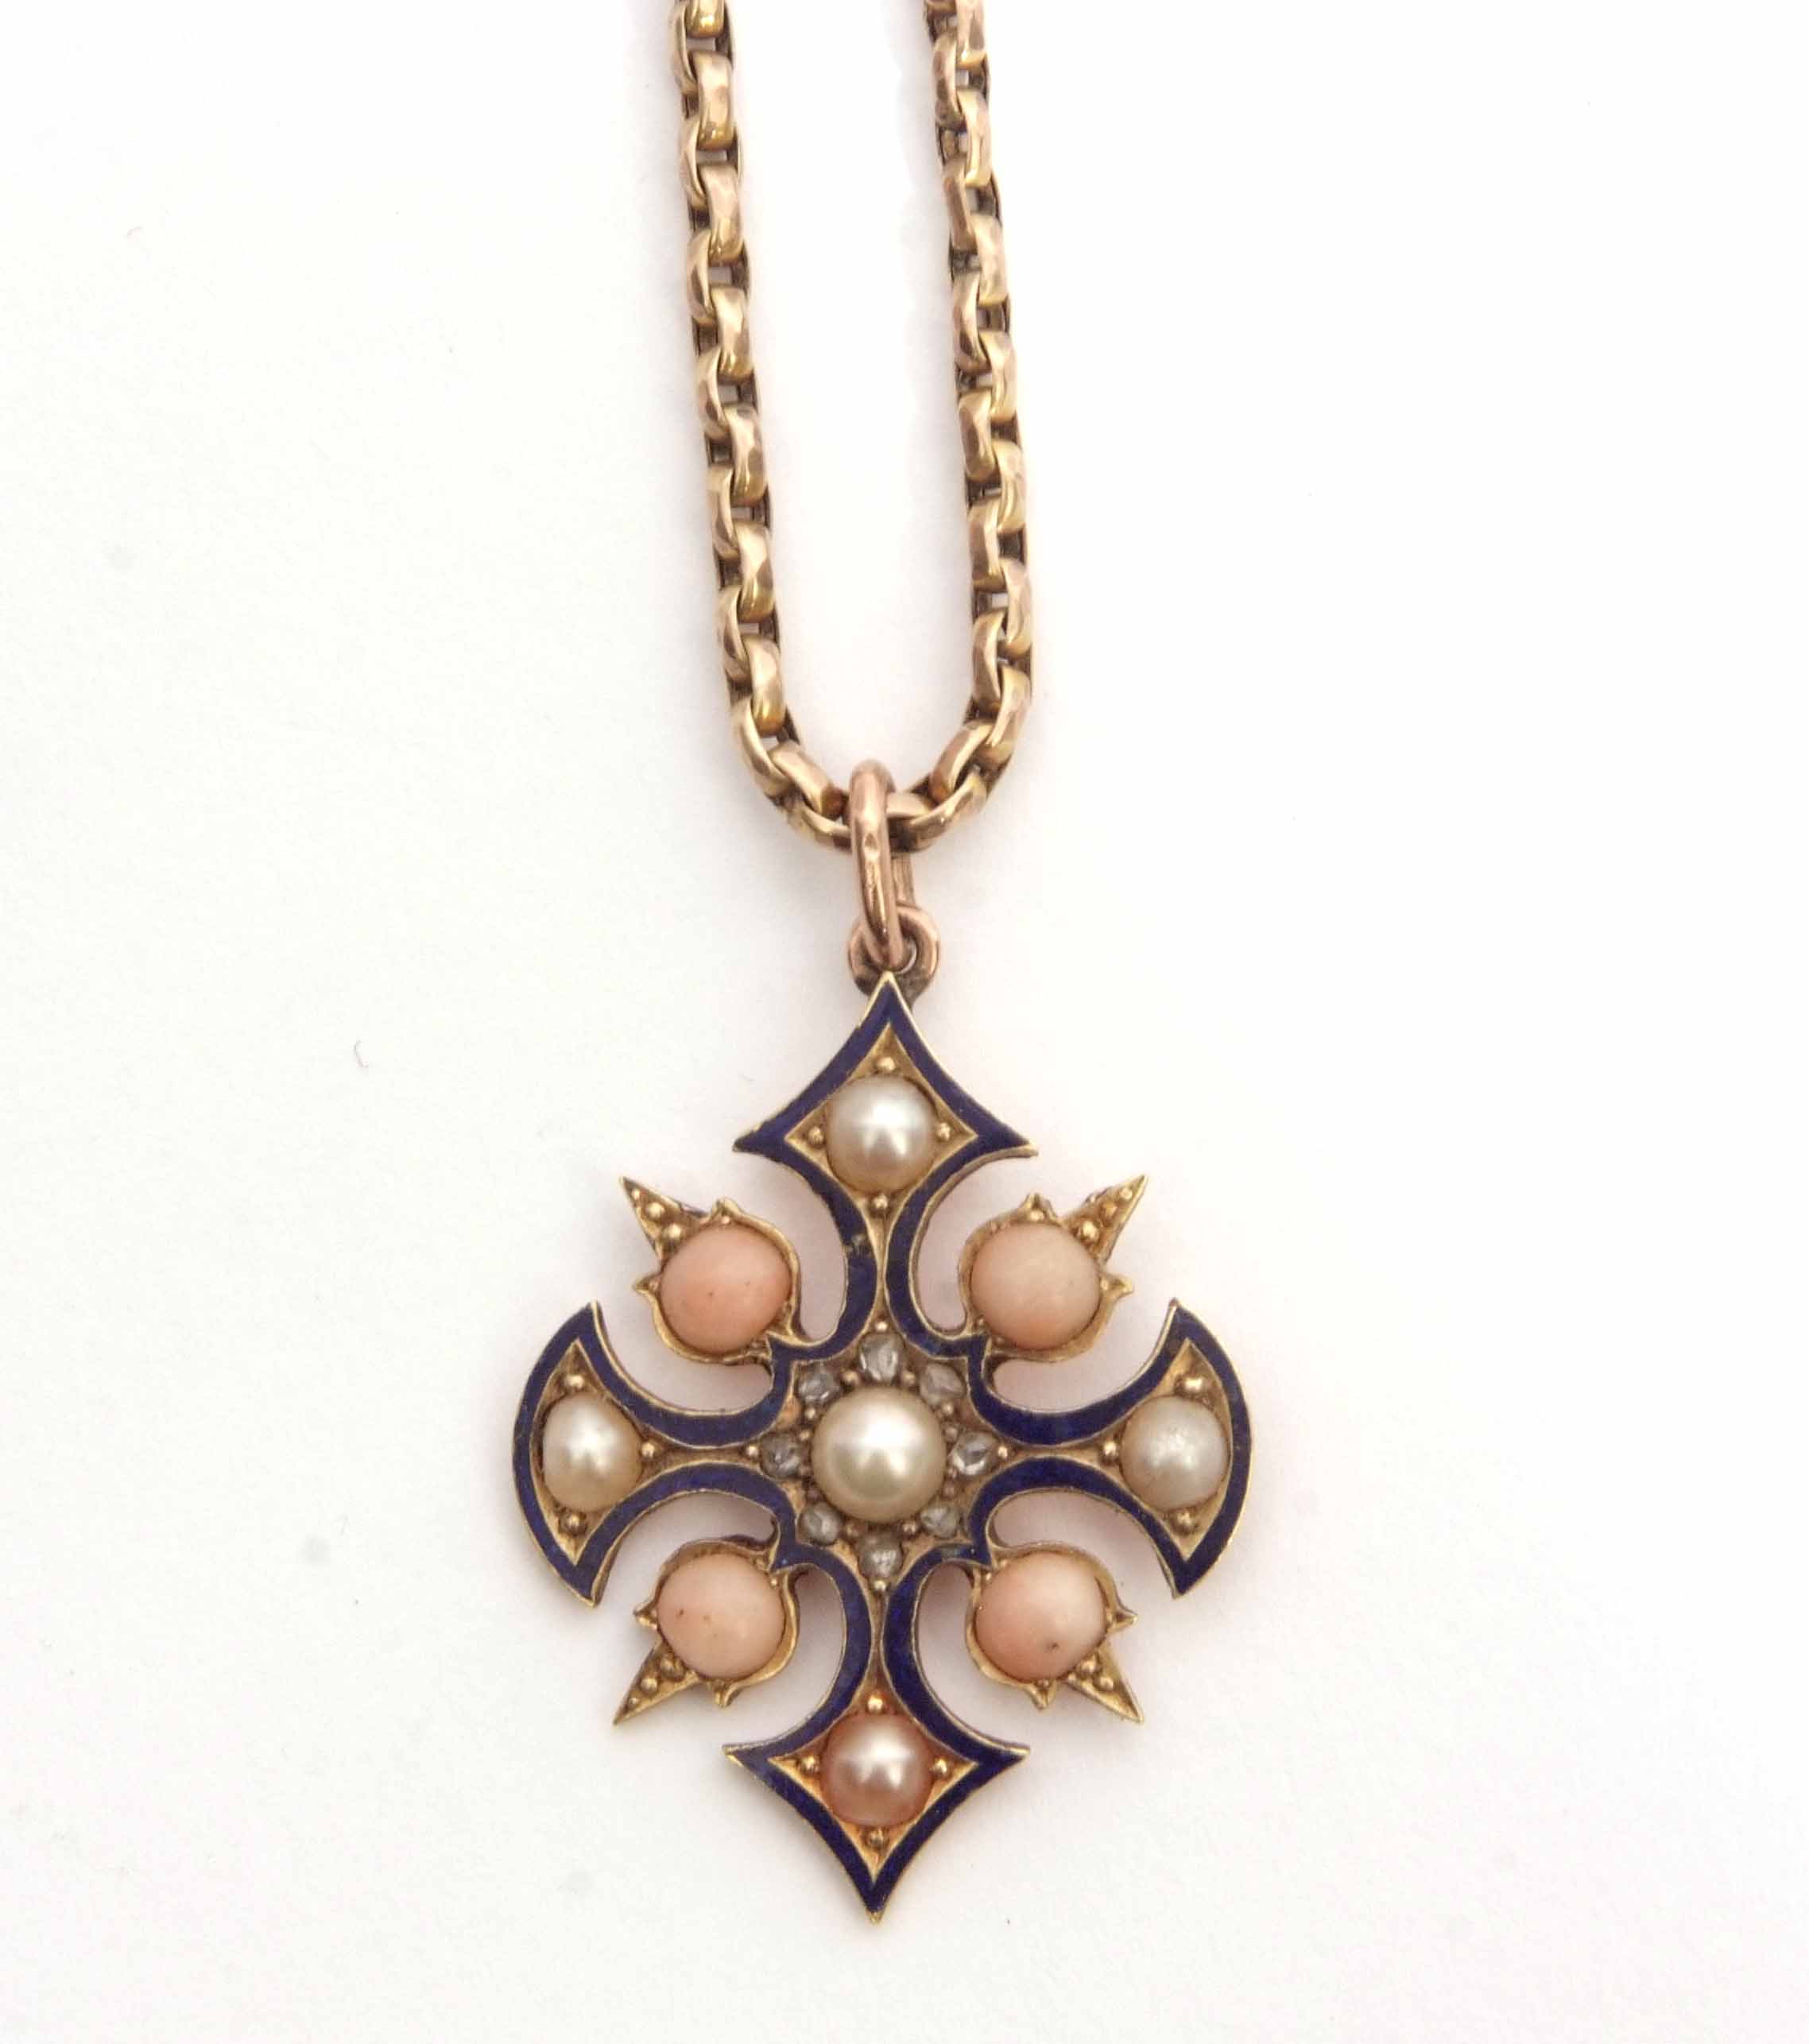 Antique blue enamel, pearl, coral and diamond set cross pendant featuring a central pearl surrounded - Image 7 of 7